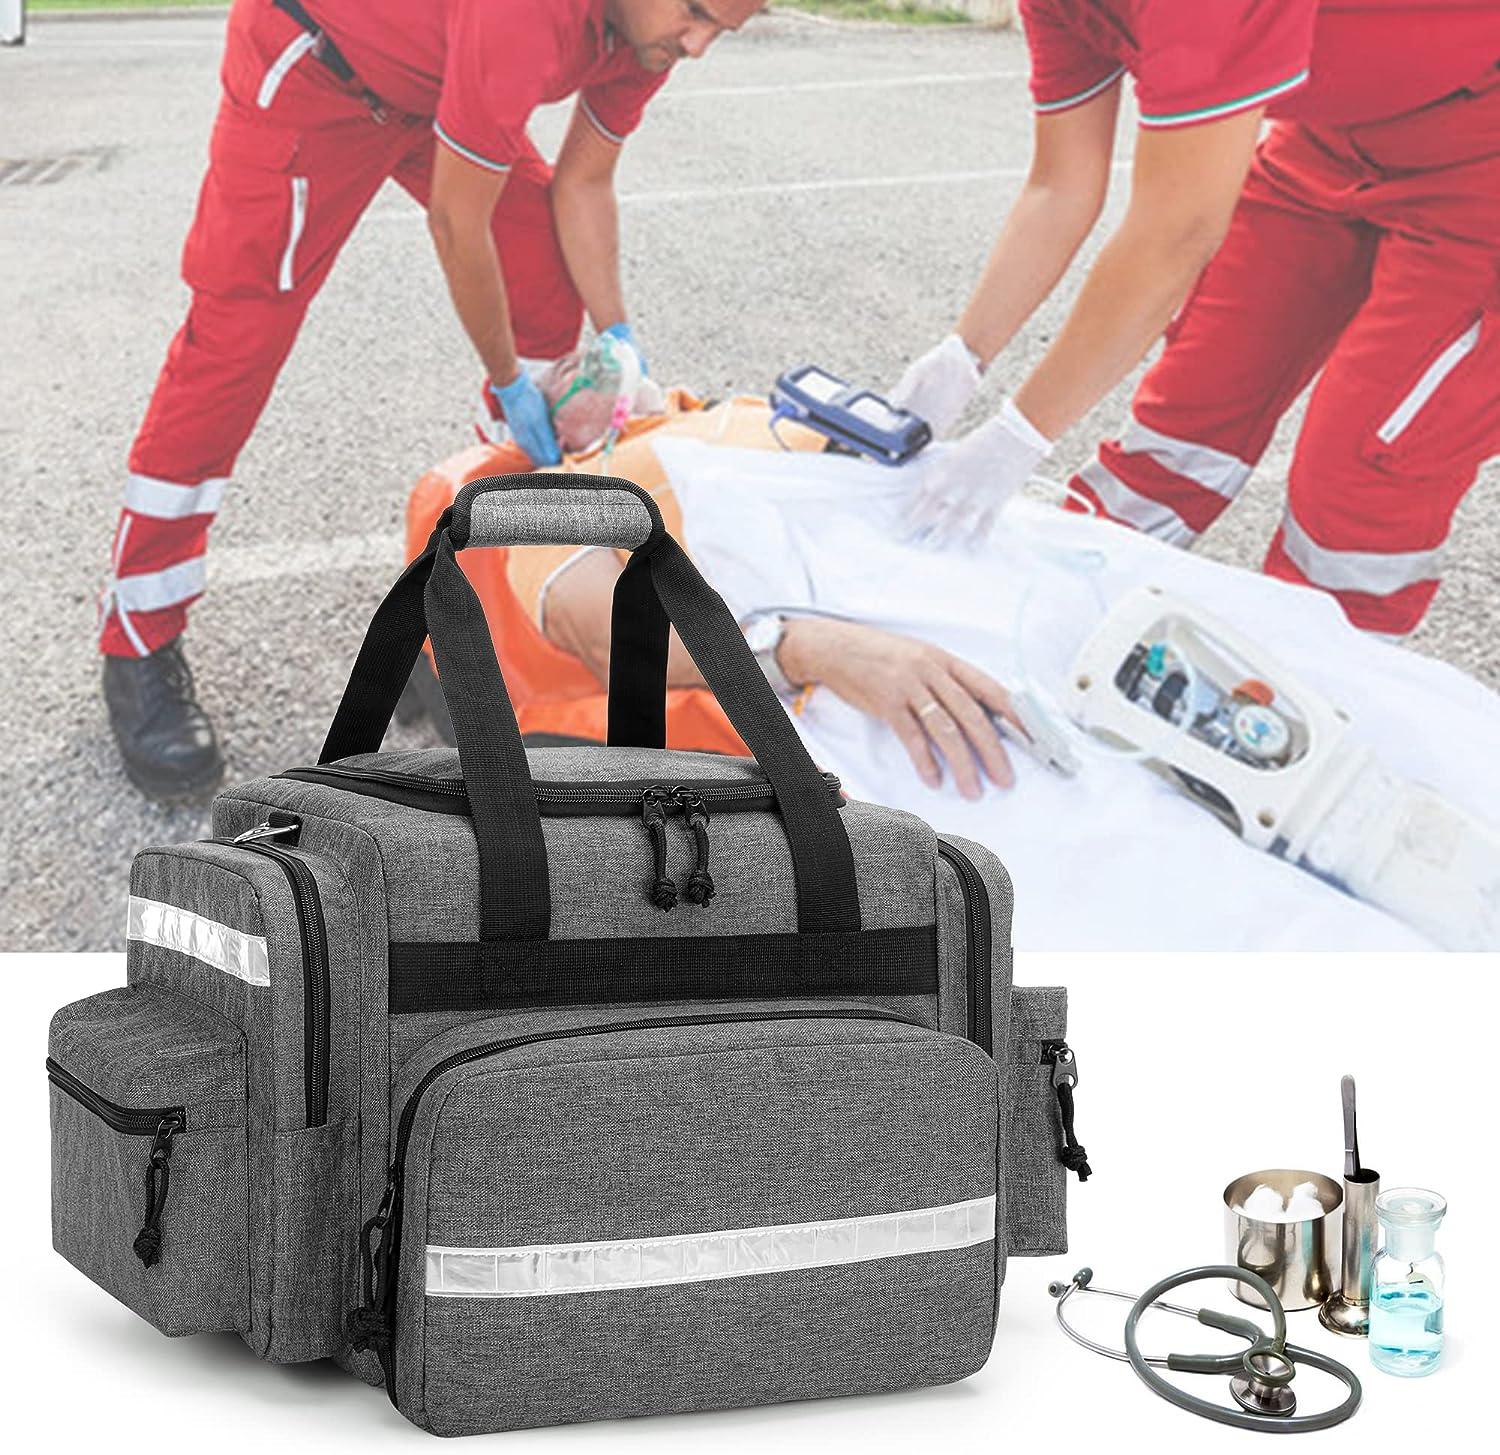  Damero Rolling Medical Bag with Detachable Trolley, Medical  Equipment Bag with Removable Pouches and Dividers, First Aid Responder Bag  Empty for Home Health Nurses, Doctors, EMT, EMS, Gray : Health 